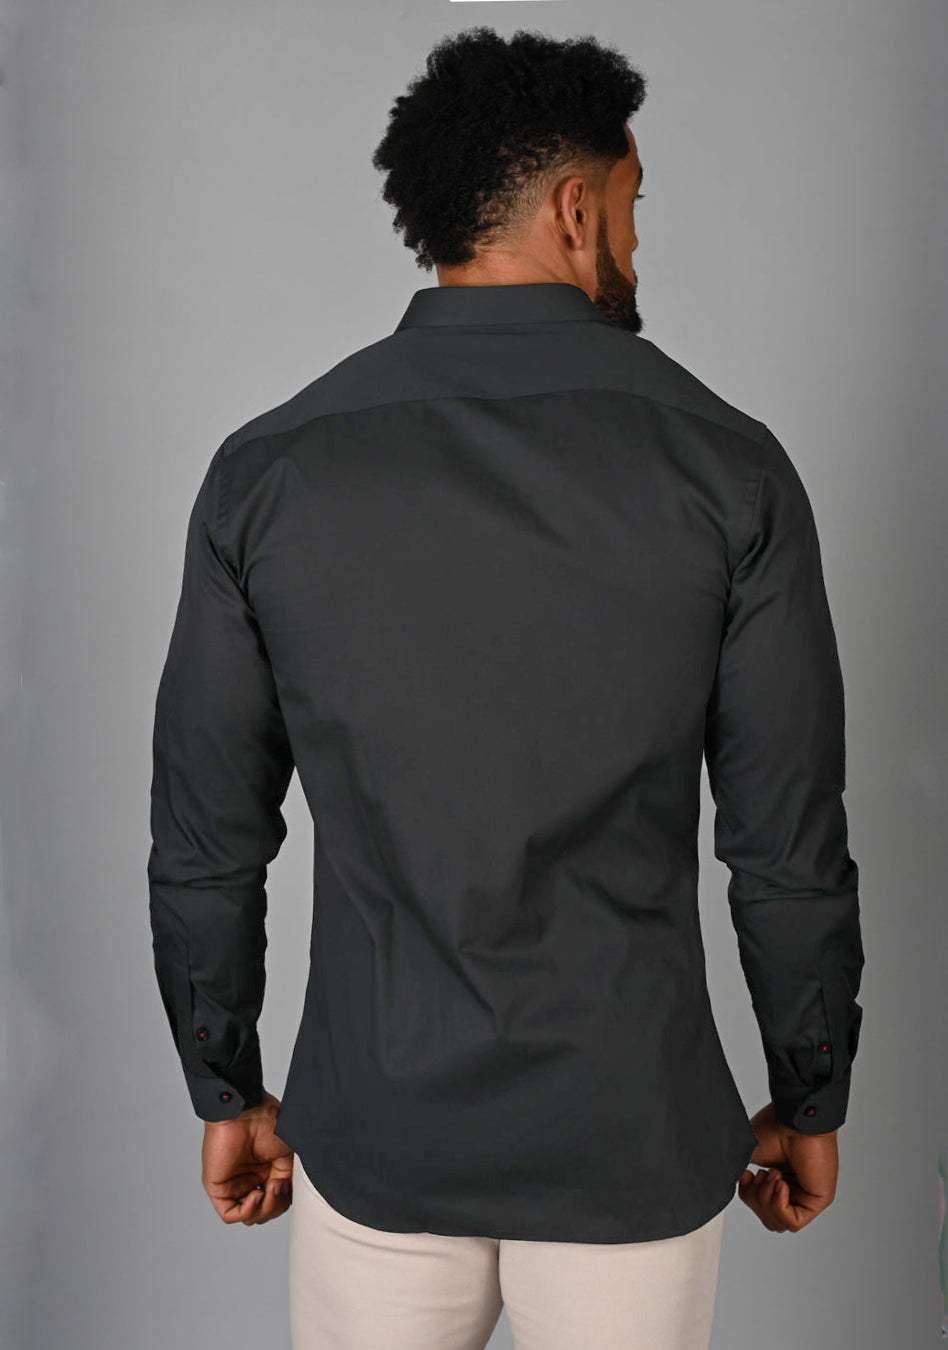 Grey athletic fit shirt on an athletically built model, showcasing the muscle fit design that enhances physique, with stretch fabric for comfort and mobility